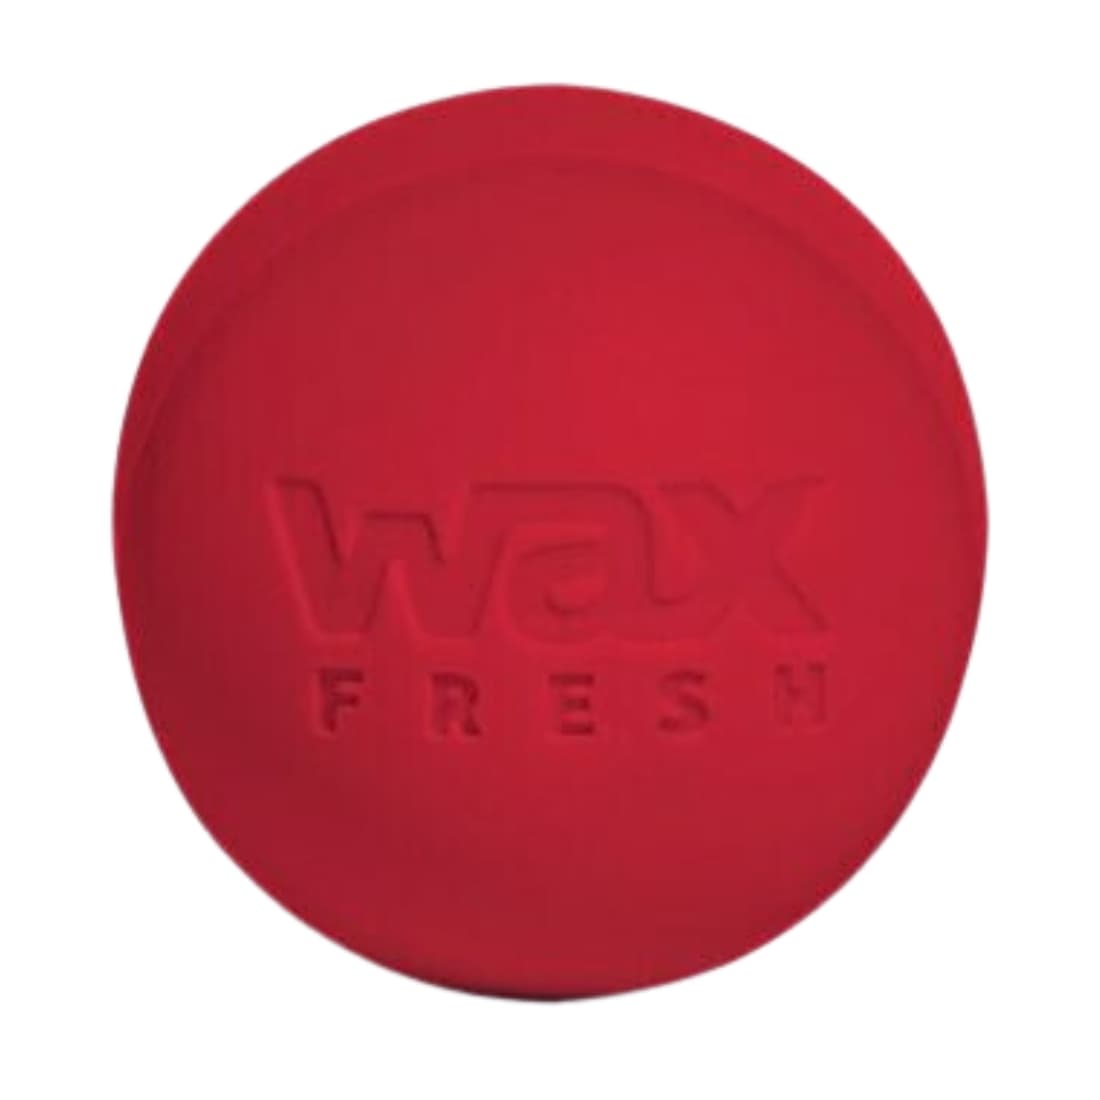 Wax Fresh Surfboard Wax Remover/Scraper - Red - Surf Wax Remover by Wax Fresh One Size